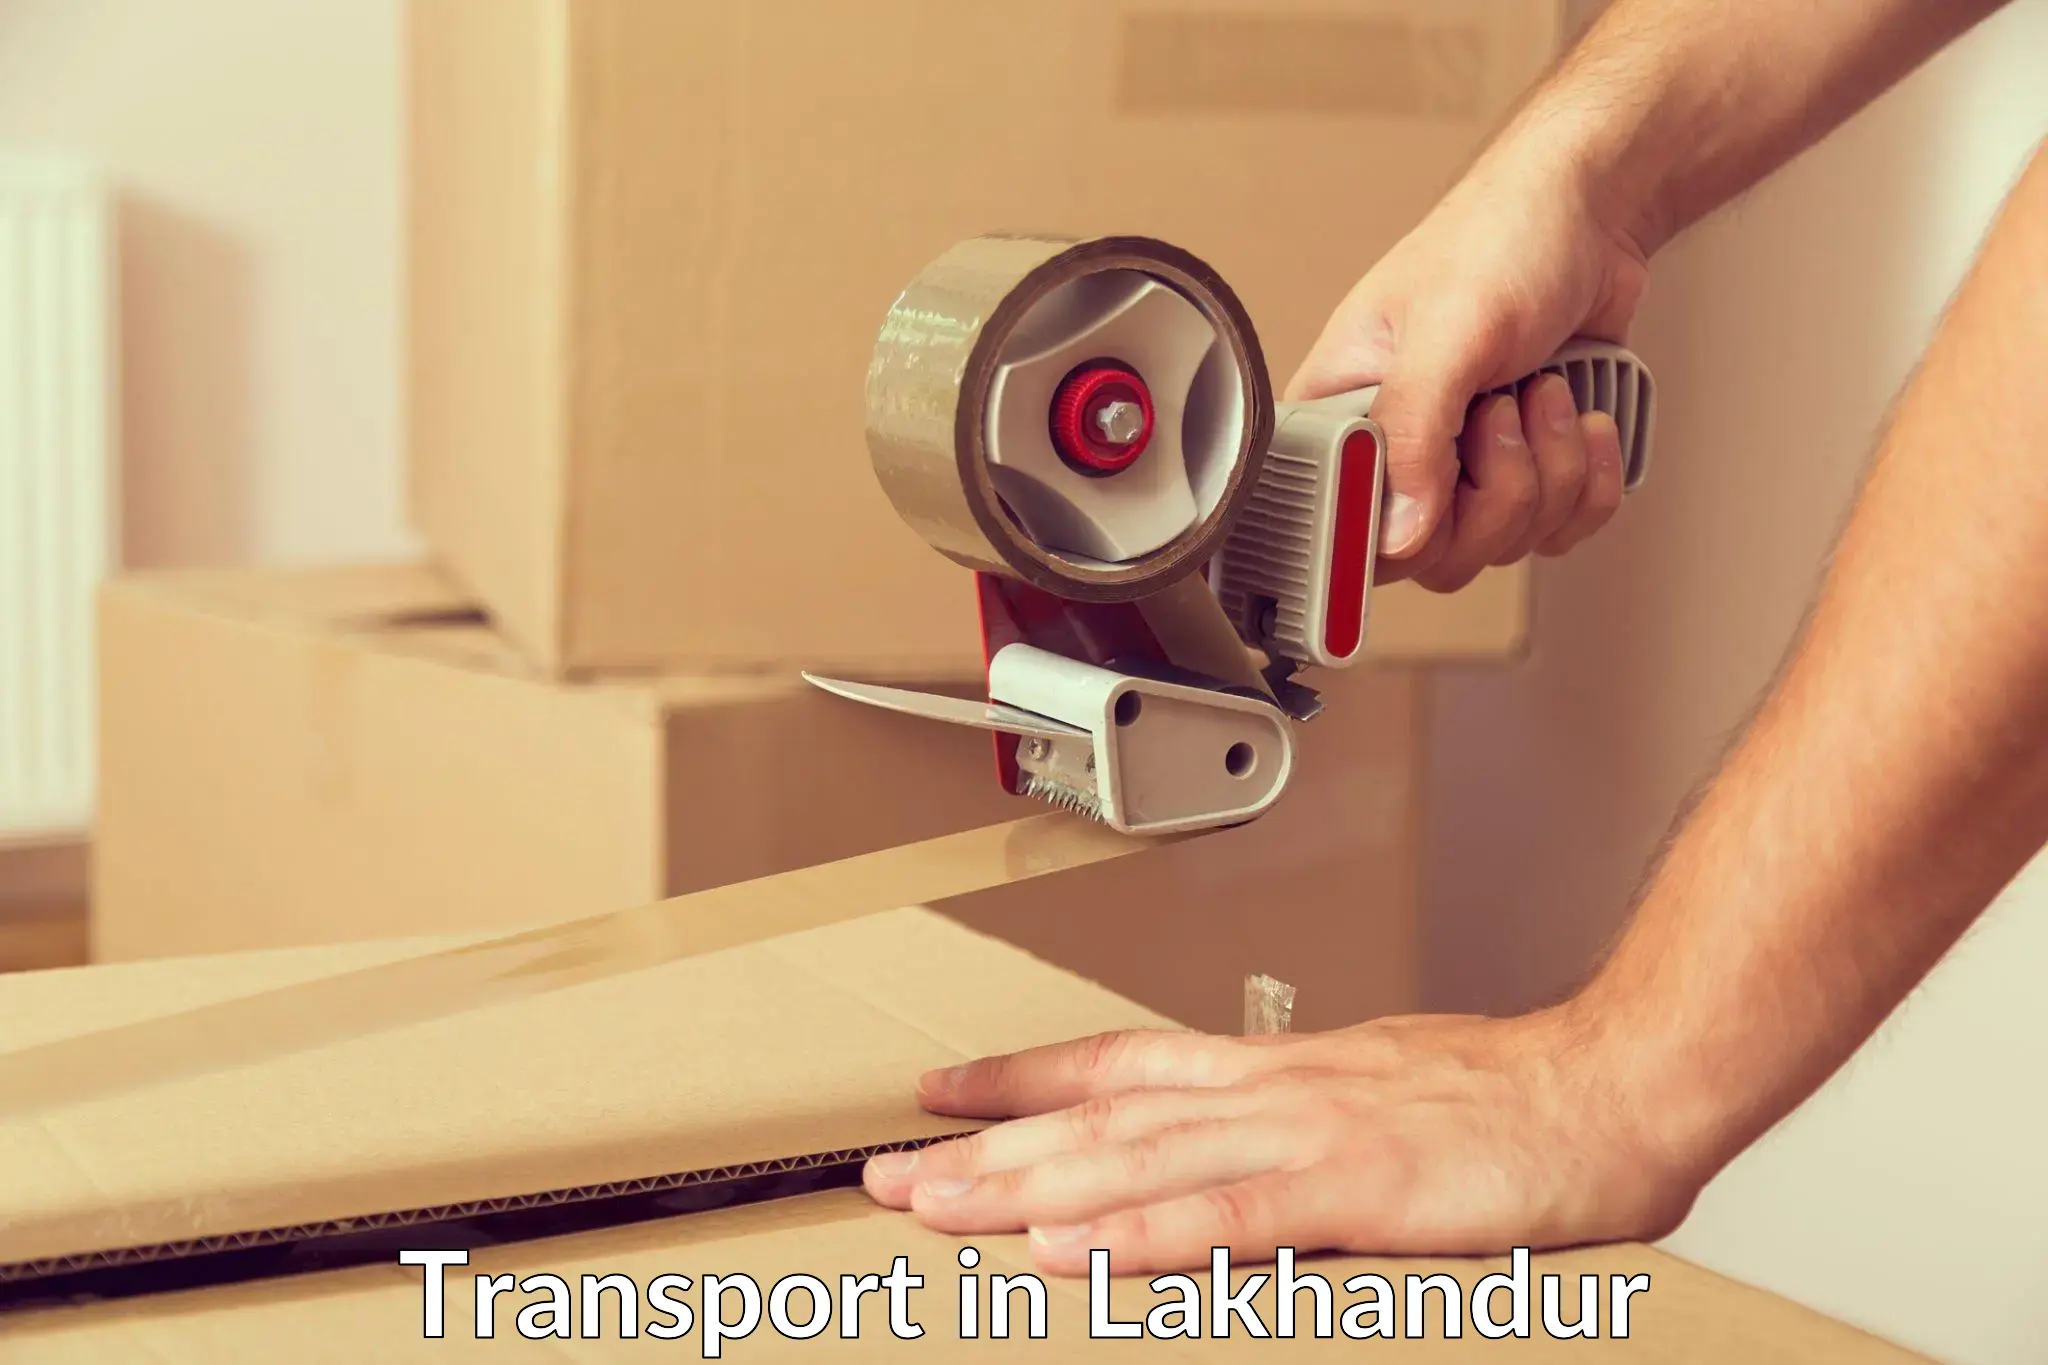 India truck logistics services in Lakhandur